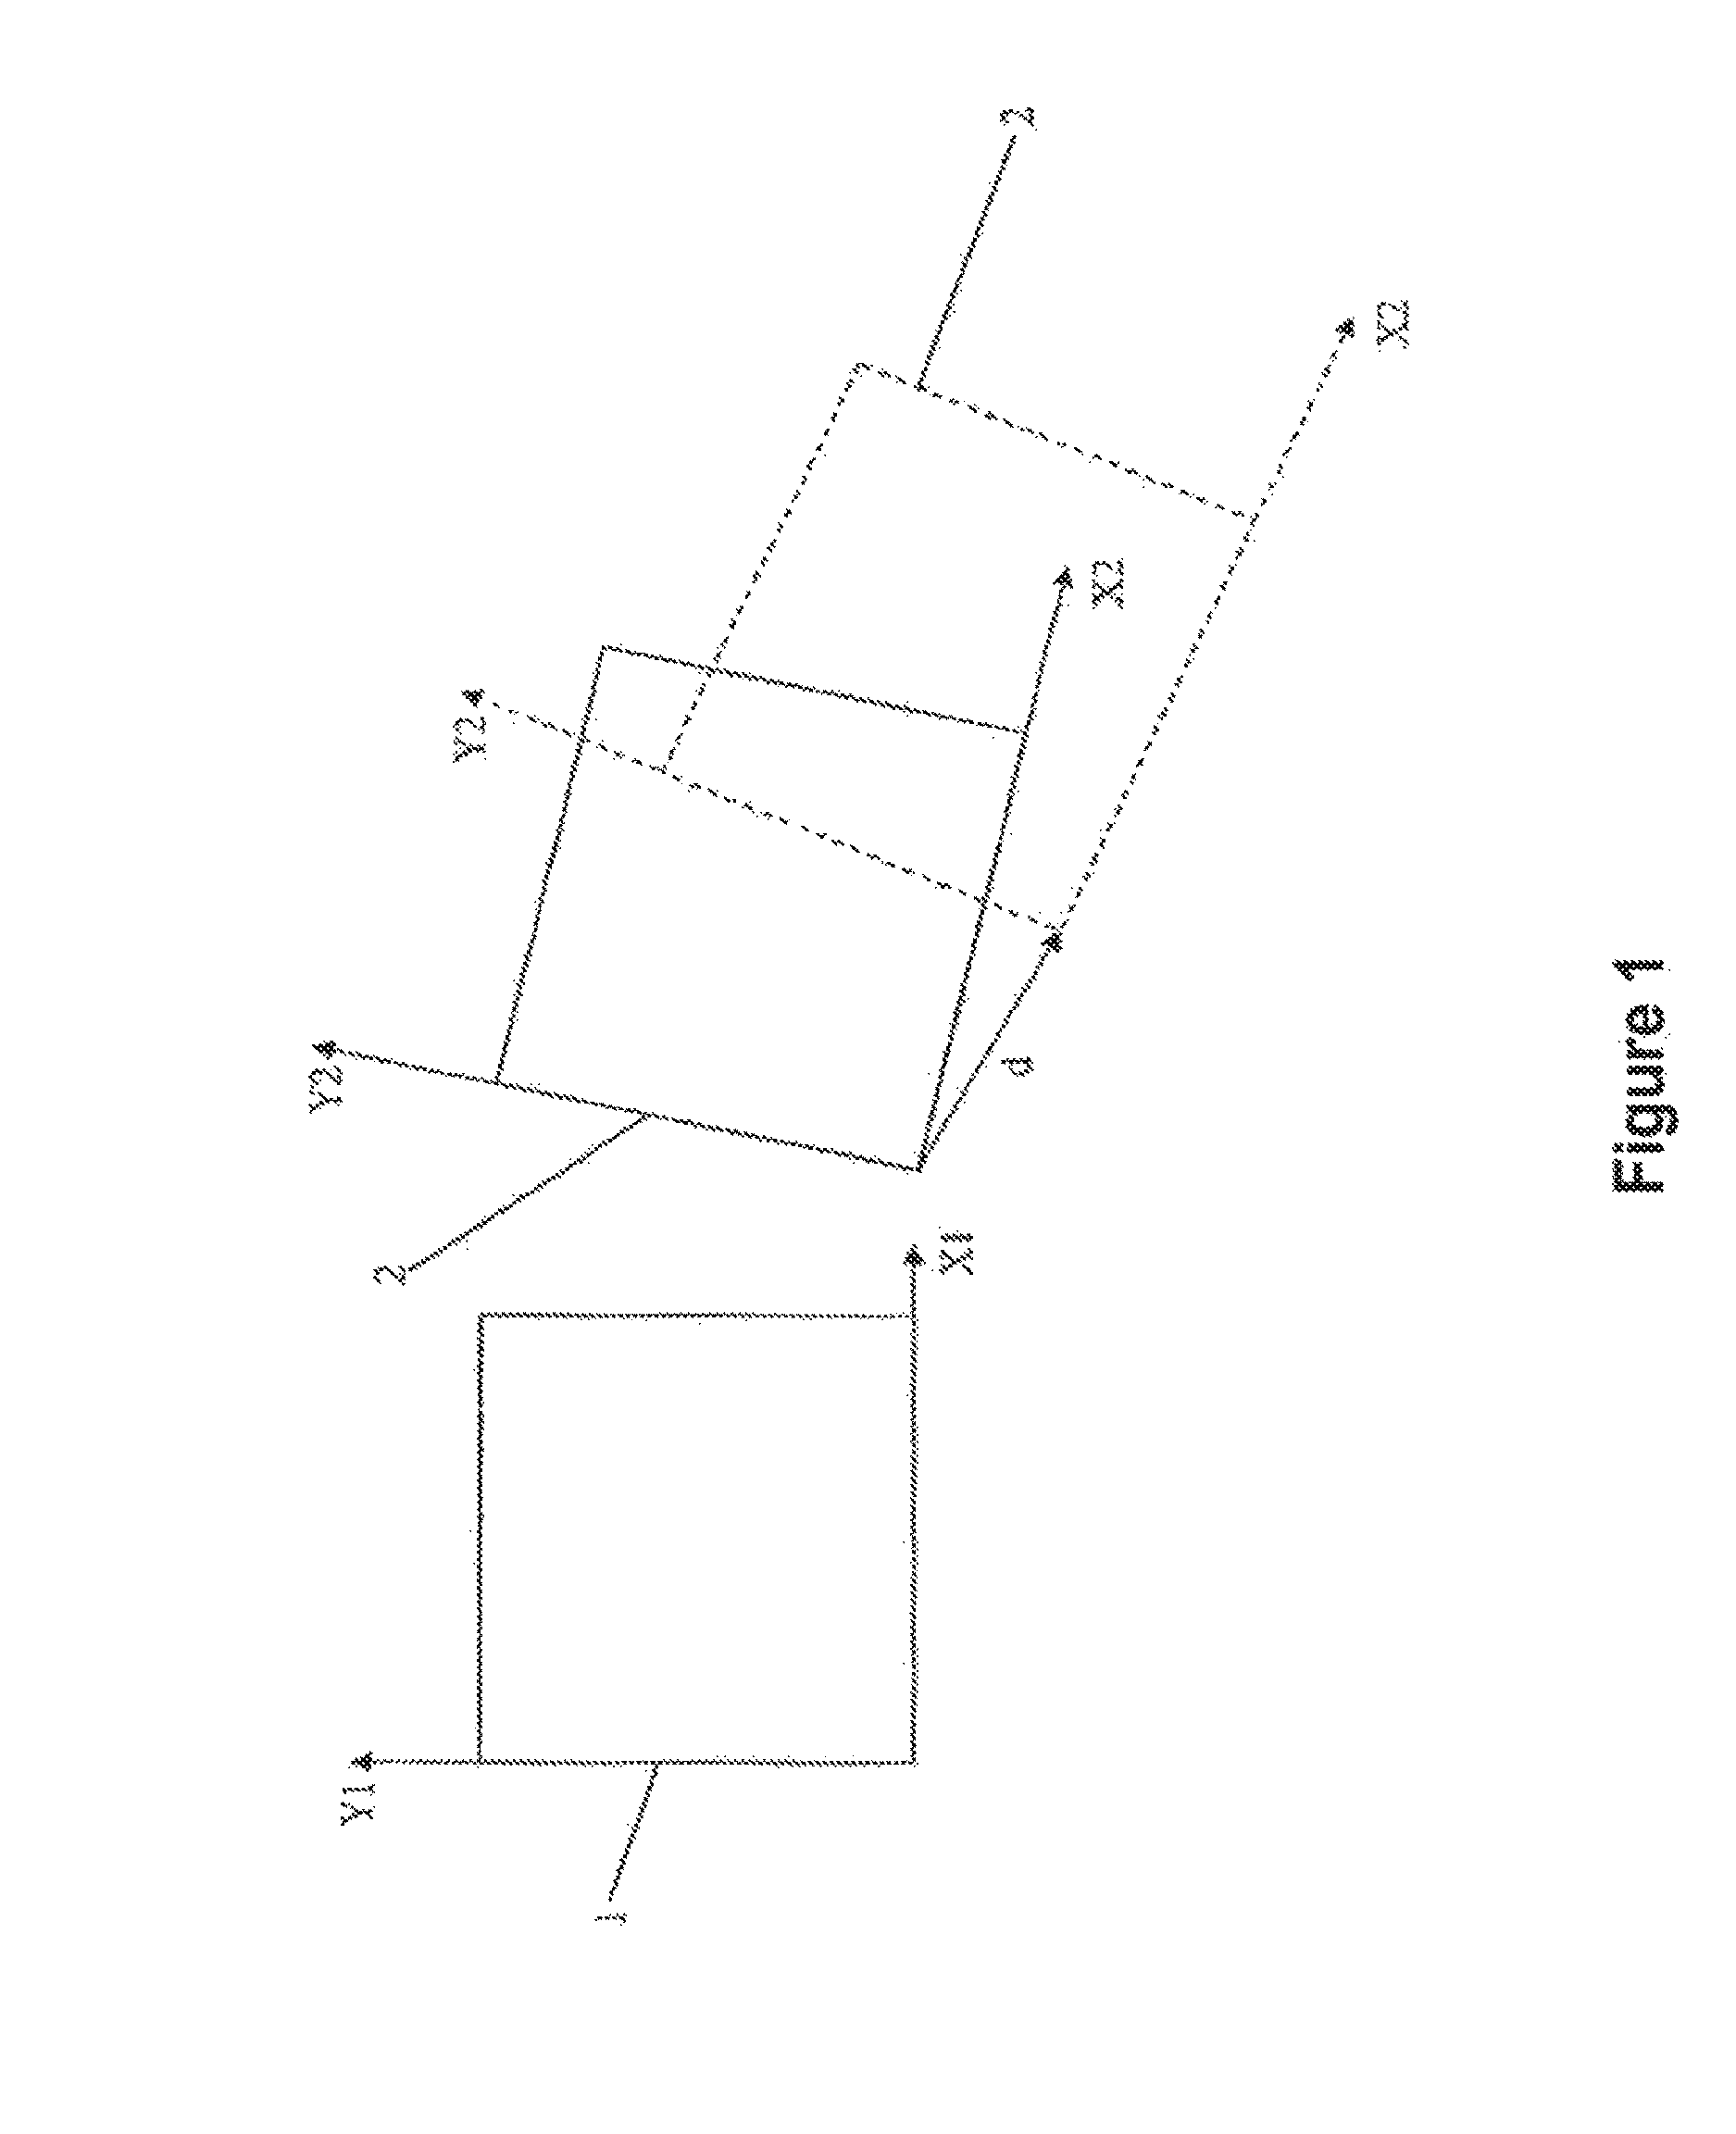 Method for verifying the relative position of bone structures